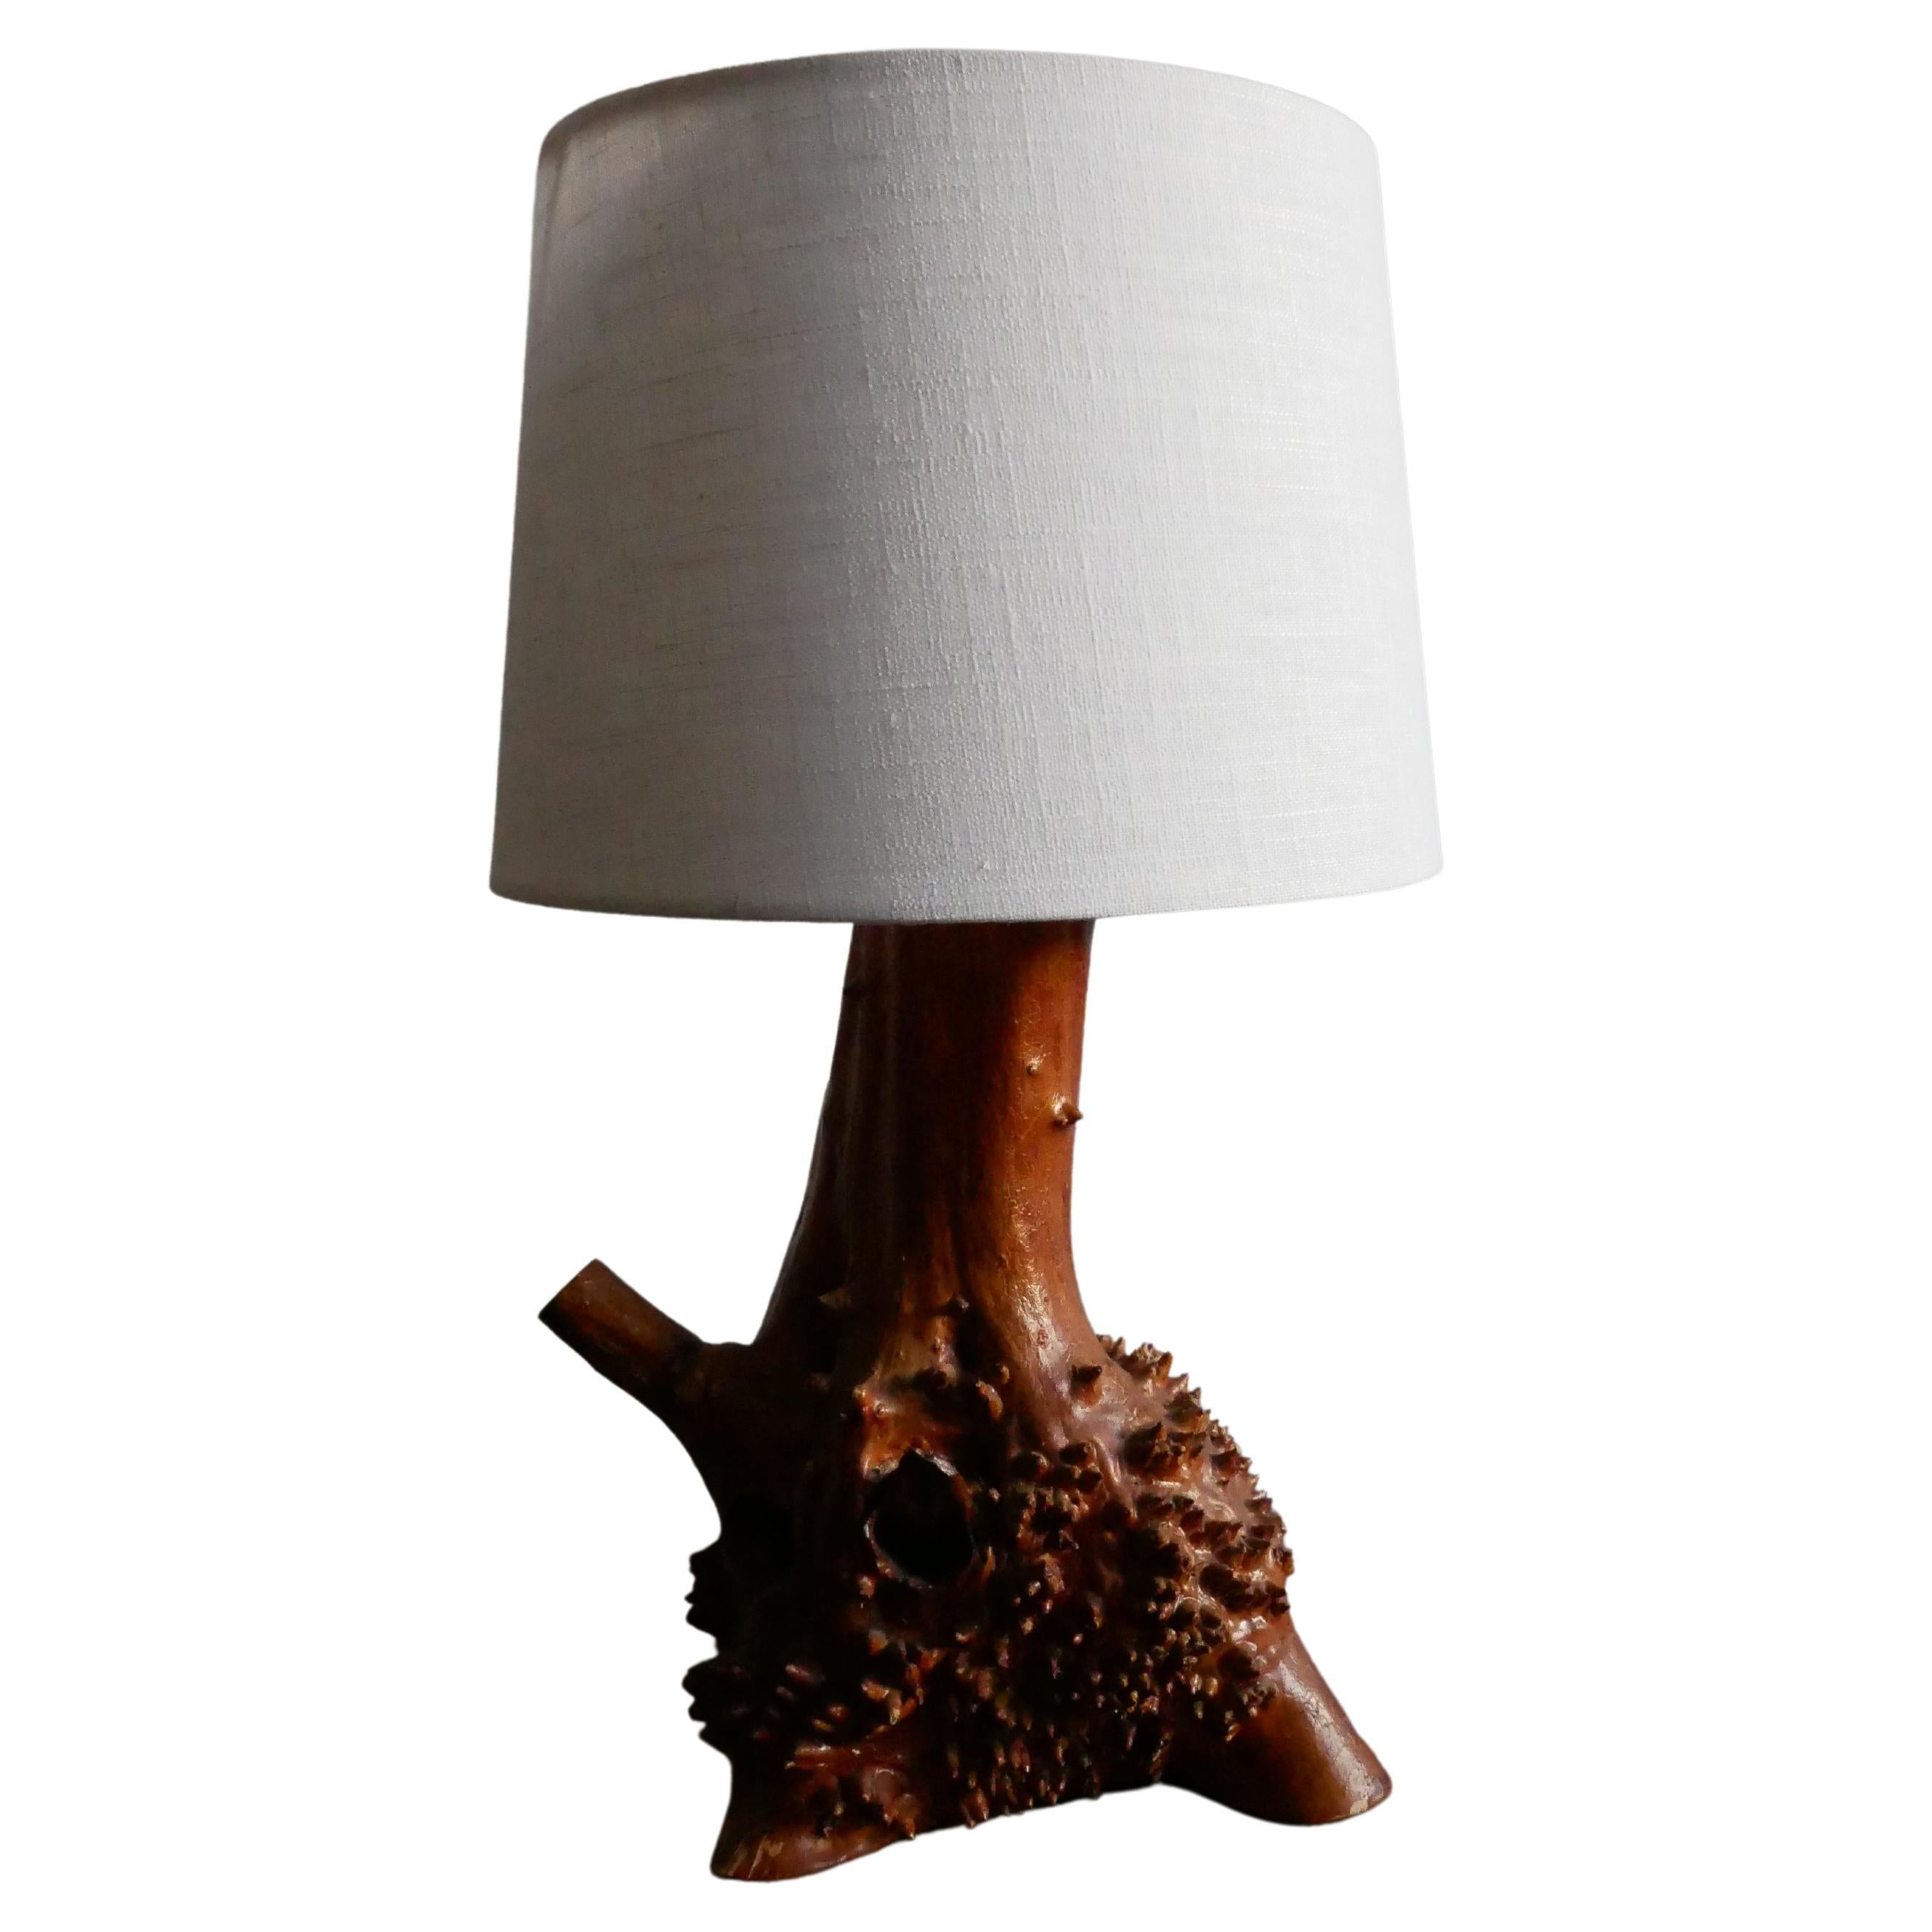 Organic wabi-sabi burl wood taple lamp, circa 1960.

The organic and textual appearance of this lamp is in its own Scandinavian way, something that you can look at many different times and still see something new. The way the wood turns and twist